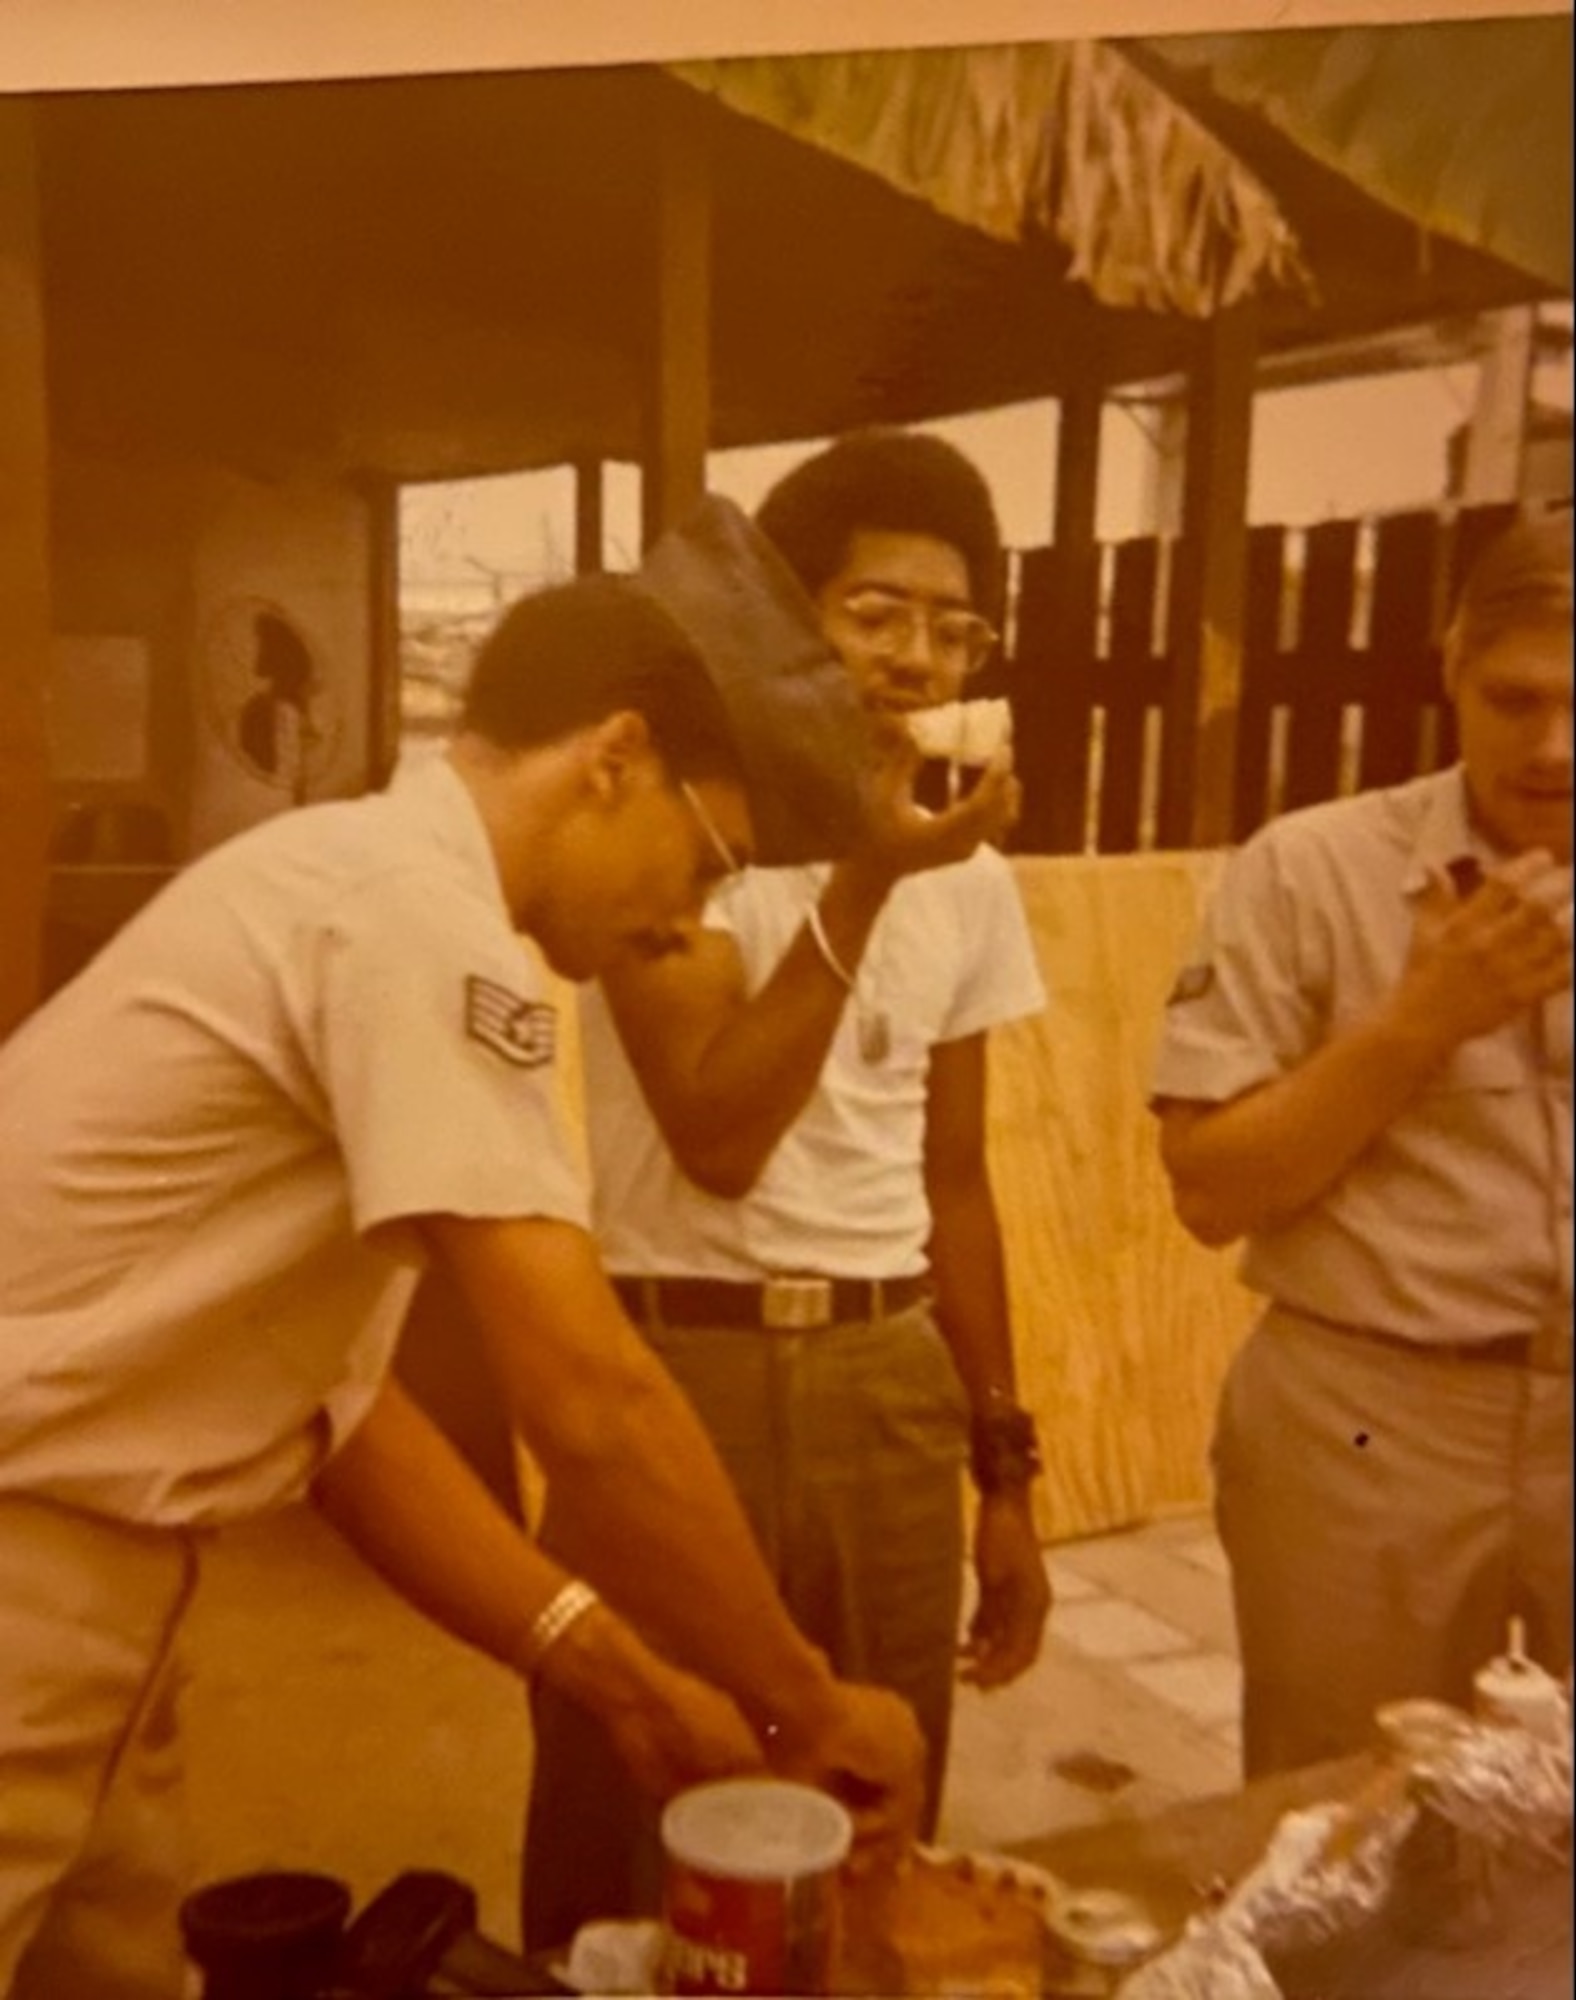 Office of Special Investigations personnel feasting on Charles Ashe's birthday cake at Tan Son Nhut Air Base, Vietnam. (Courtesy Charles Ashe photo).